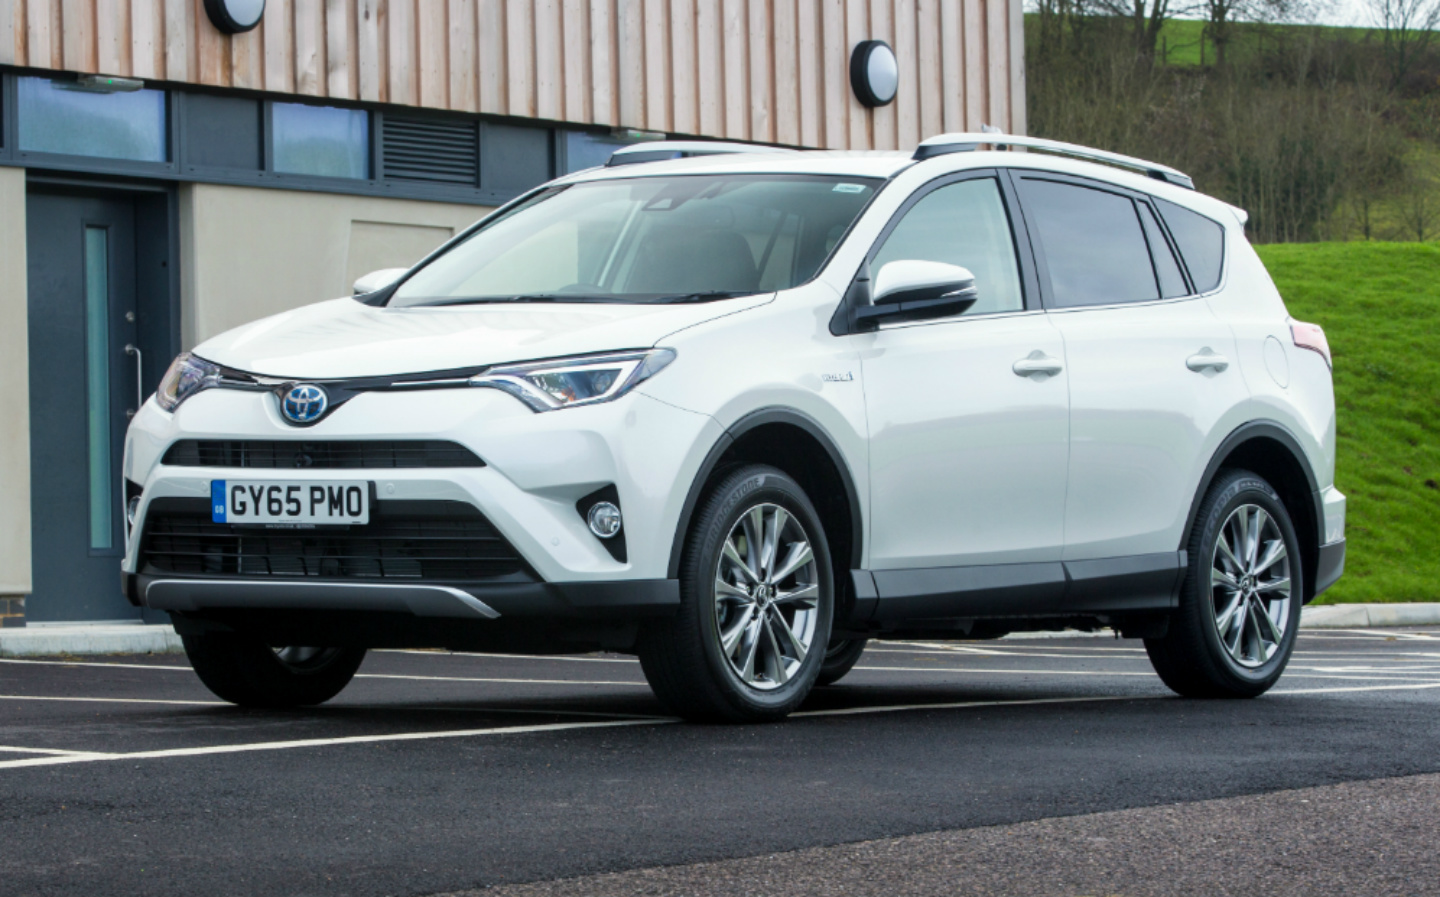 Top 10 Most Purchased Cars In Nigeria: Toyota Rav 4